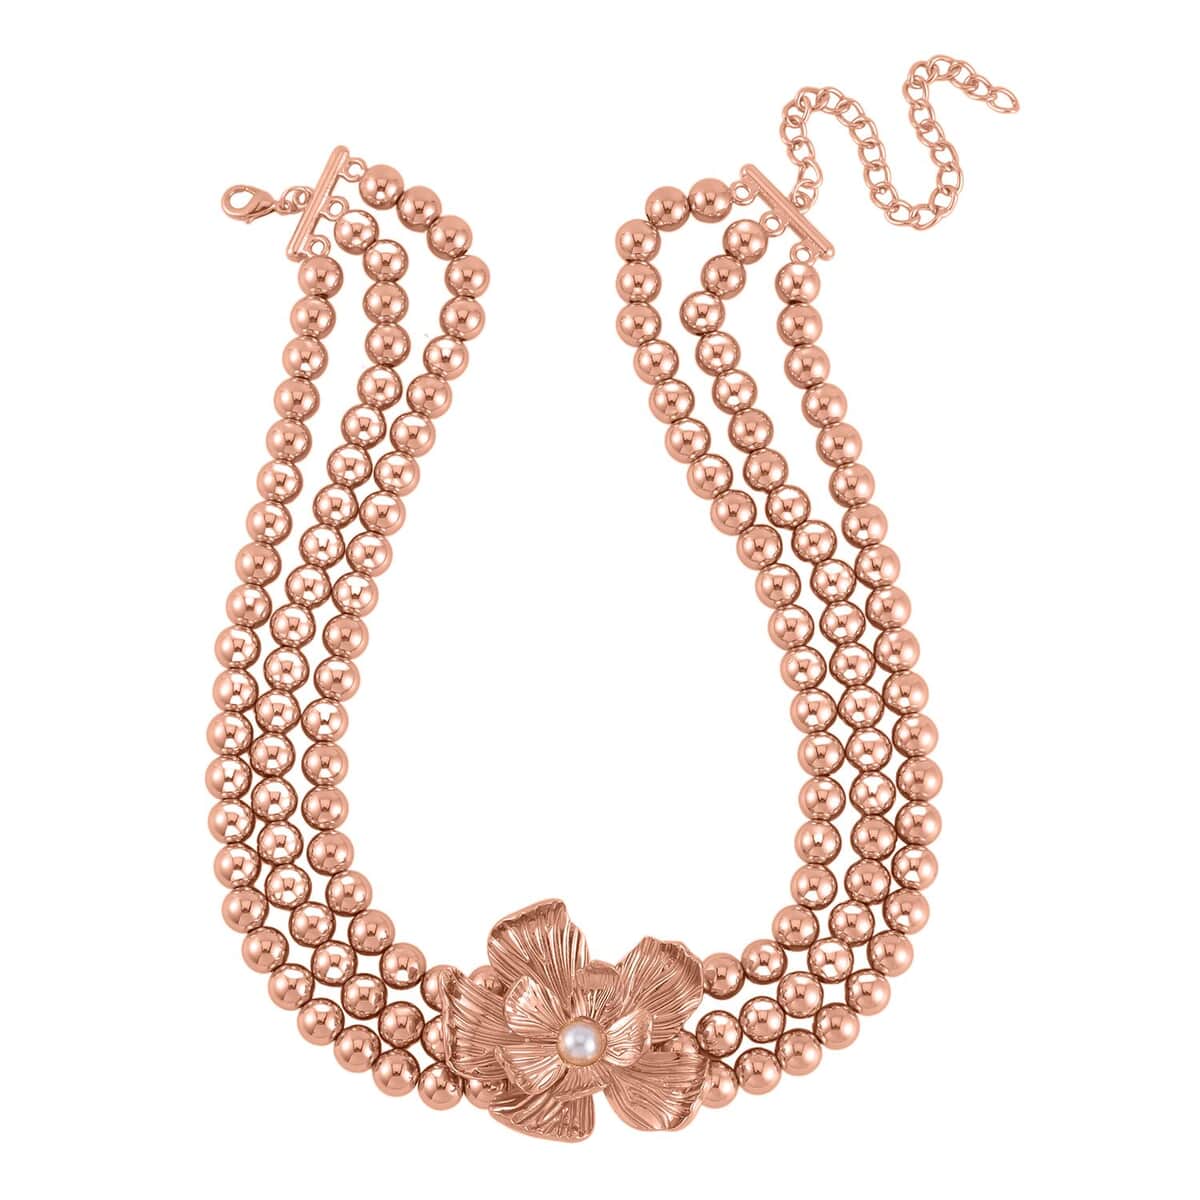 Simulated Pearl Flower Necklace and Bracelet (7-7.5In) and Earrings in Rosetone 16-20 Inches image number 2